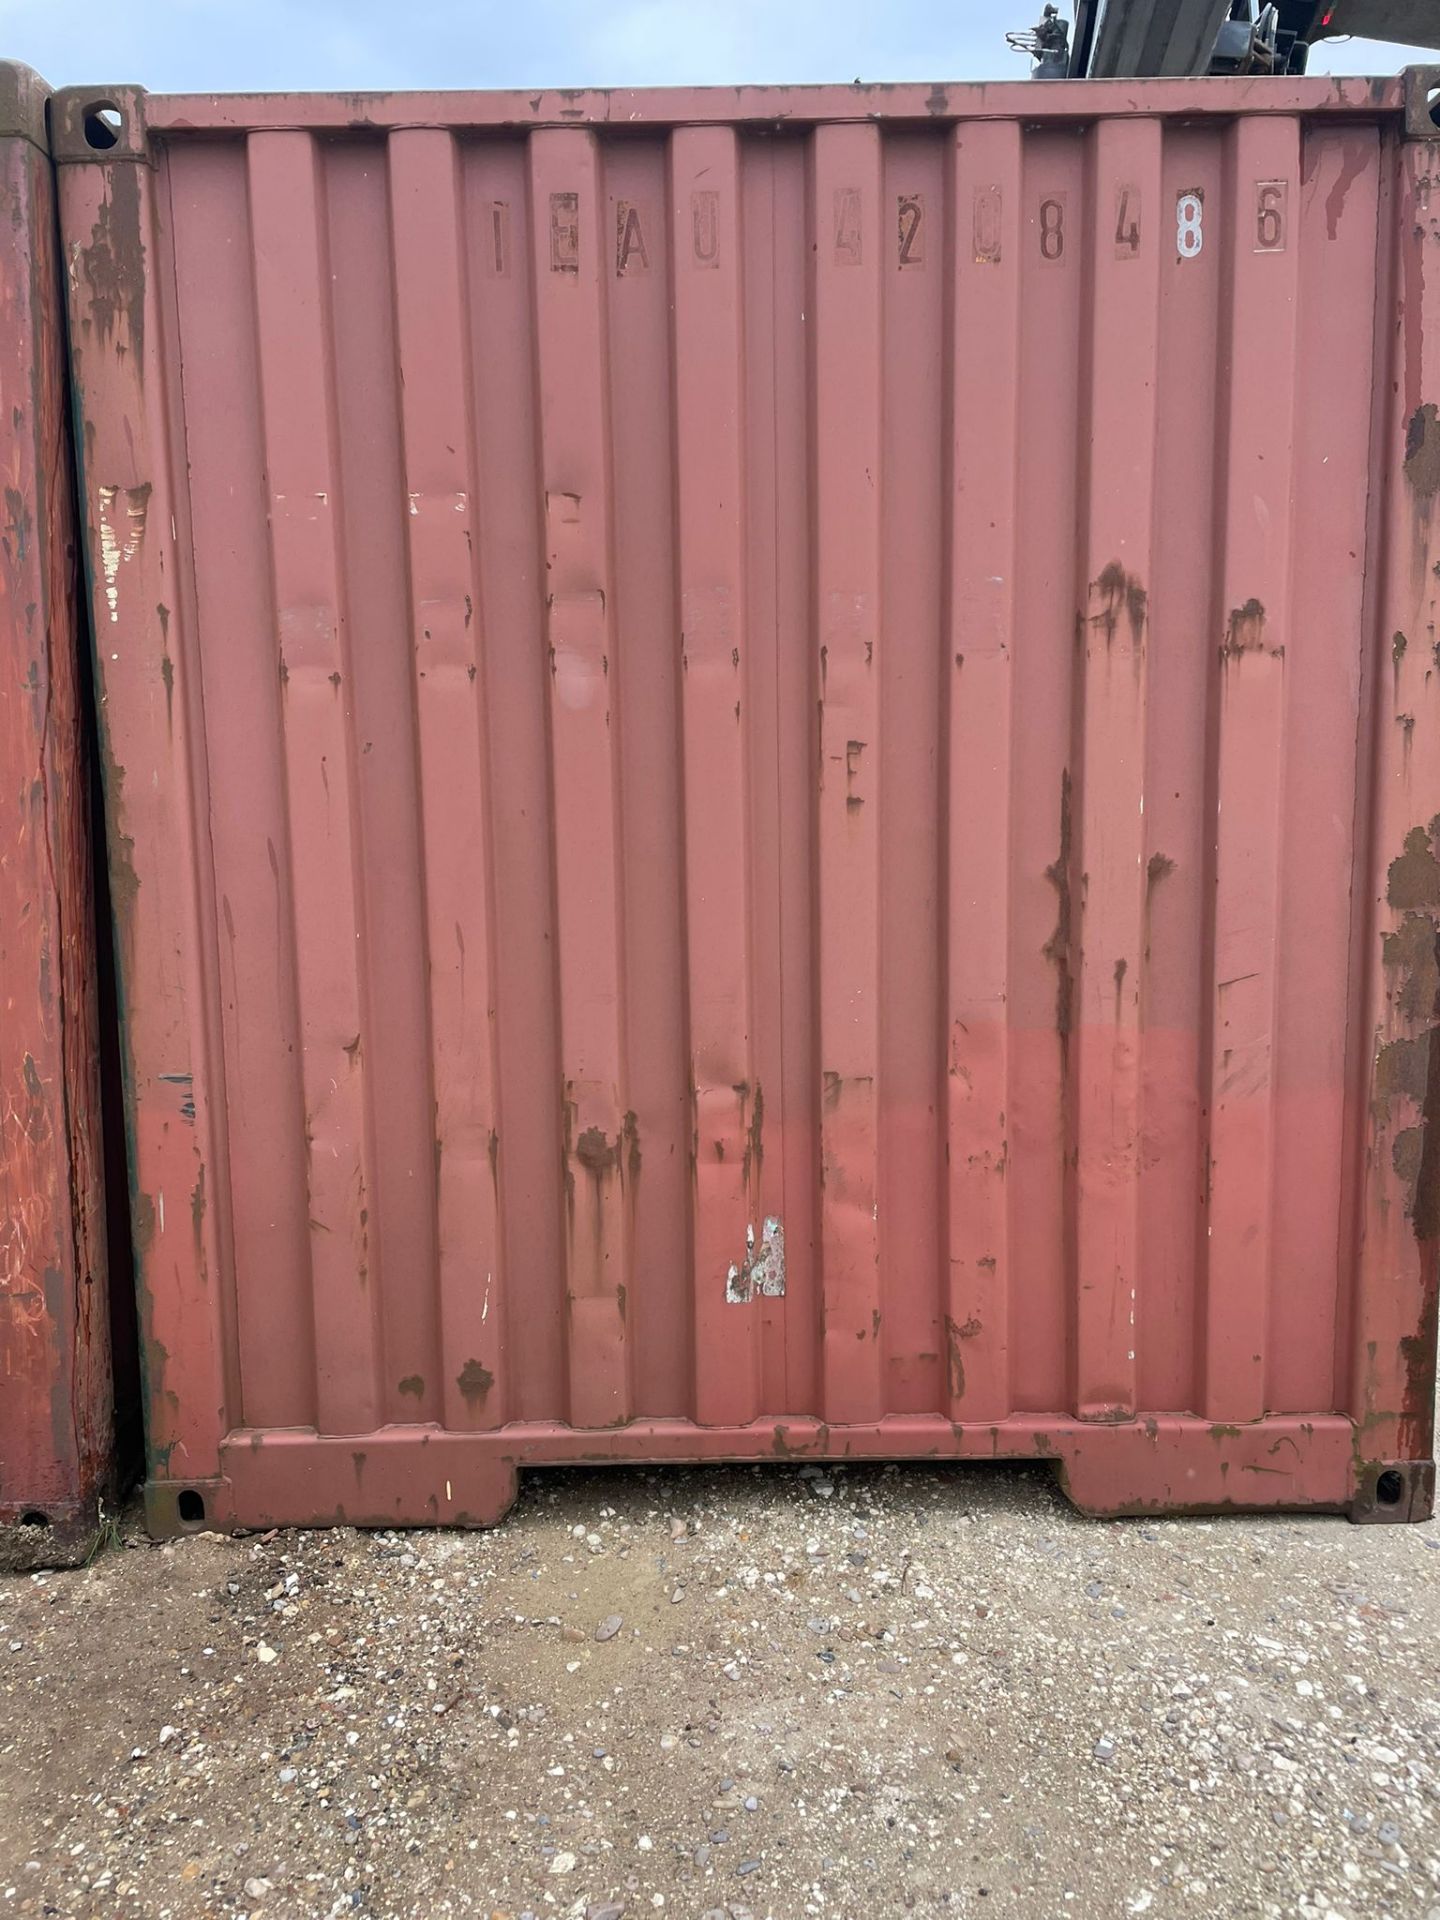 Shipping Container - ref IEAU4208486 - NO RESERVE (40’ GP - Standard) - Image 4 of 4